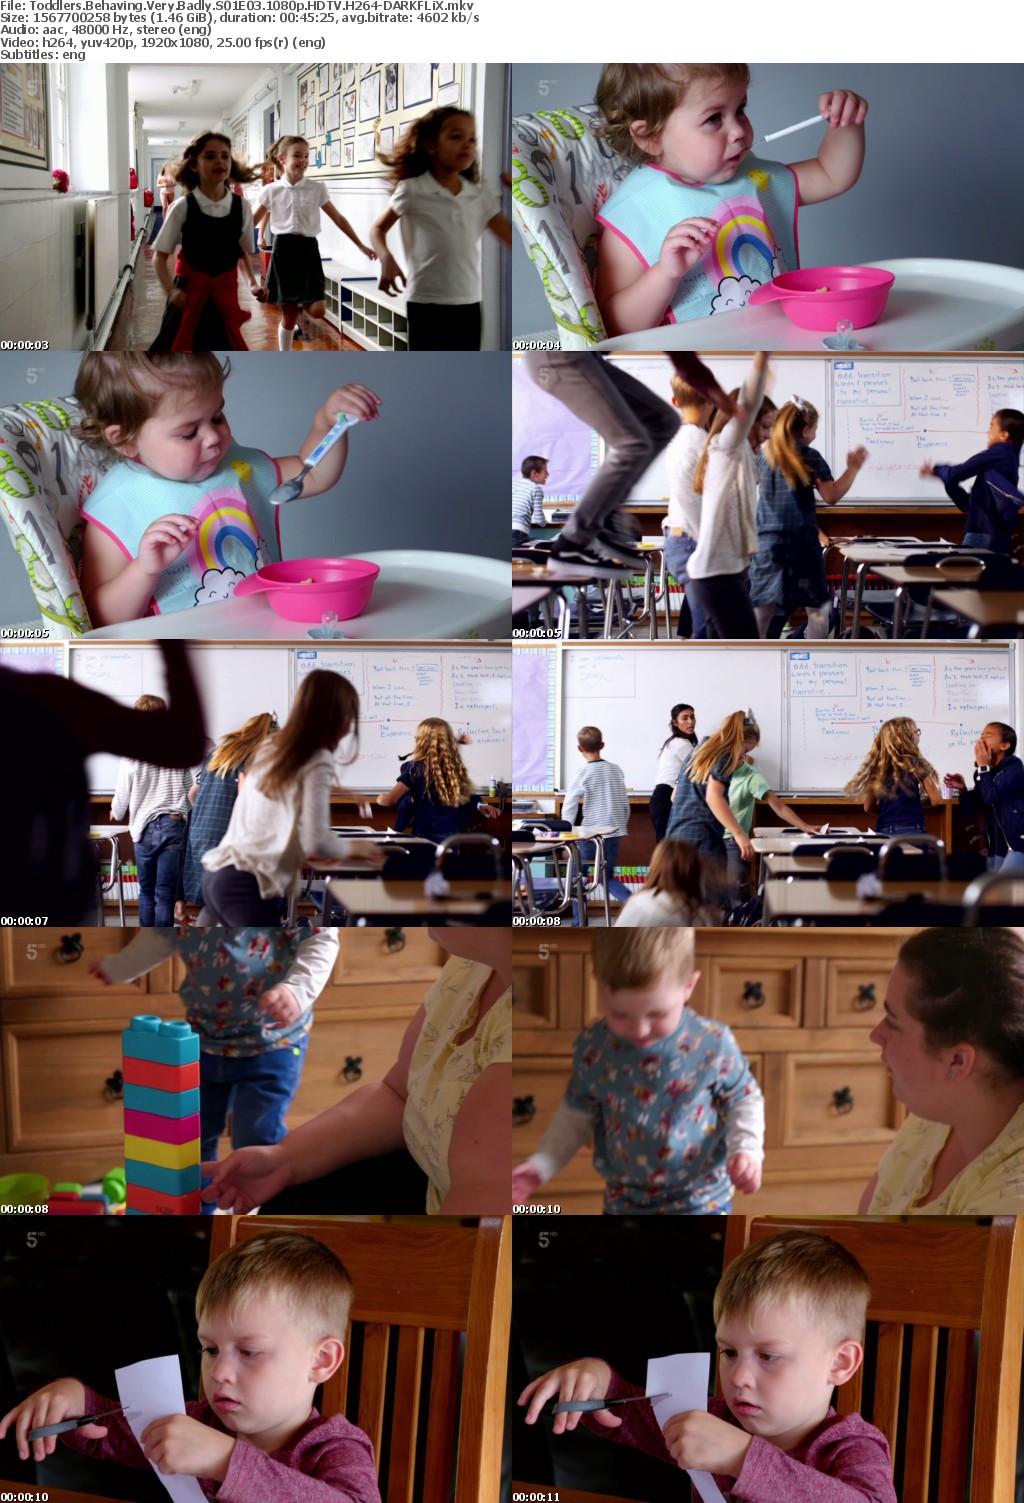 Toddlers Behaving Very Badly S01 1080p HDTV H264-LE